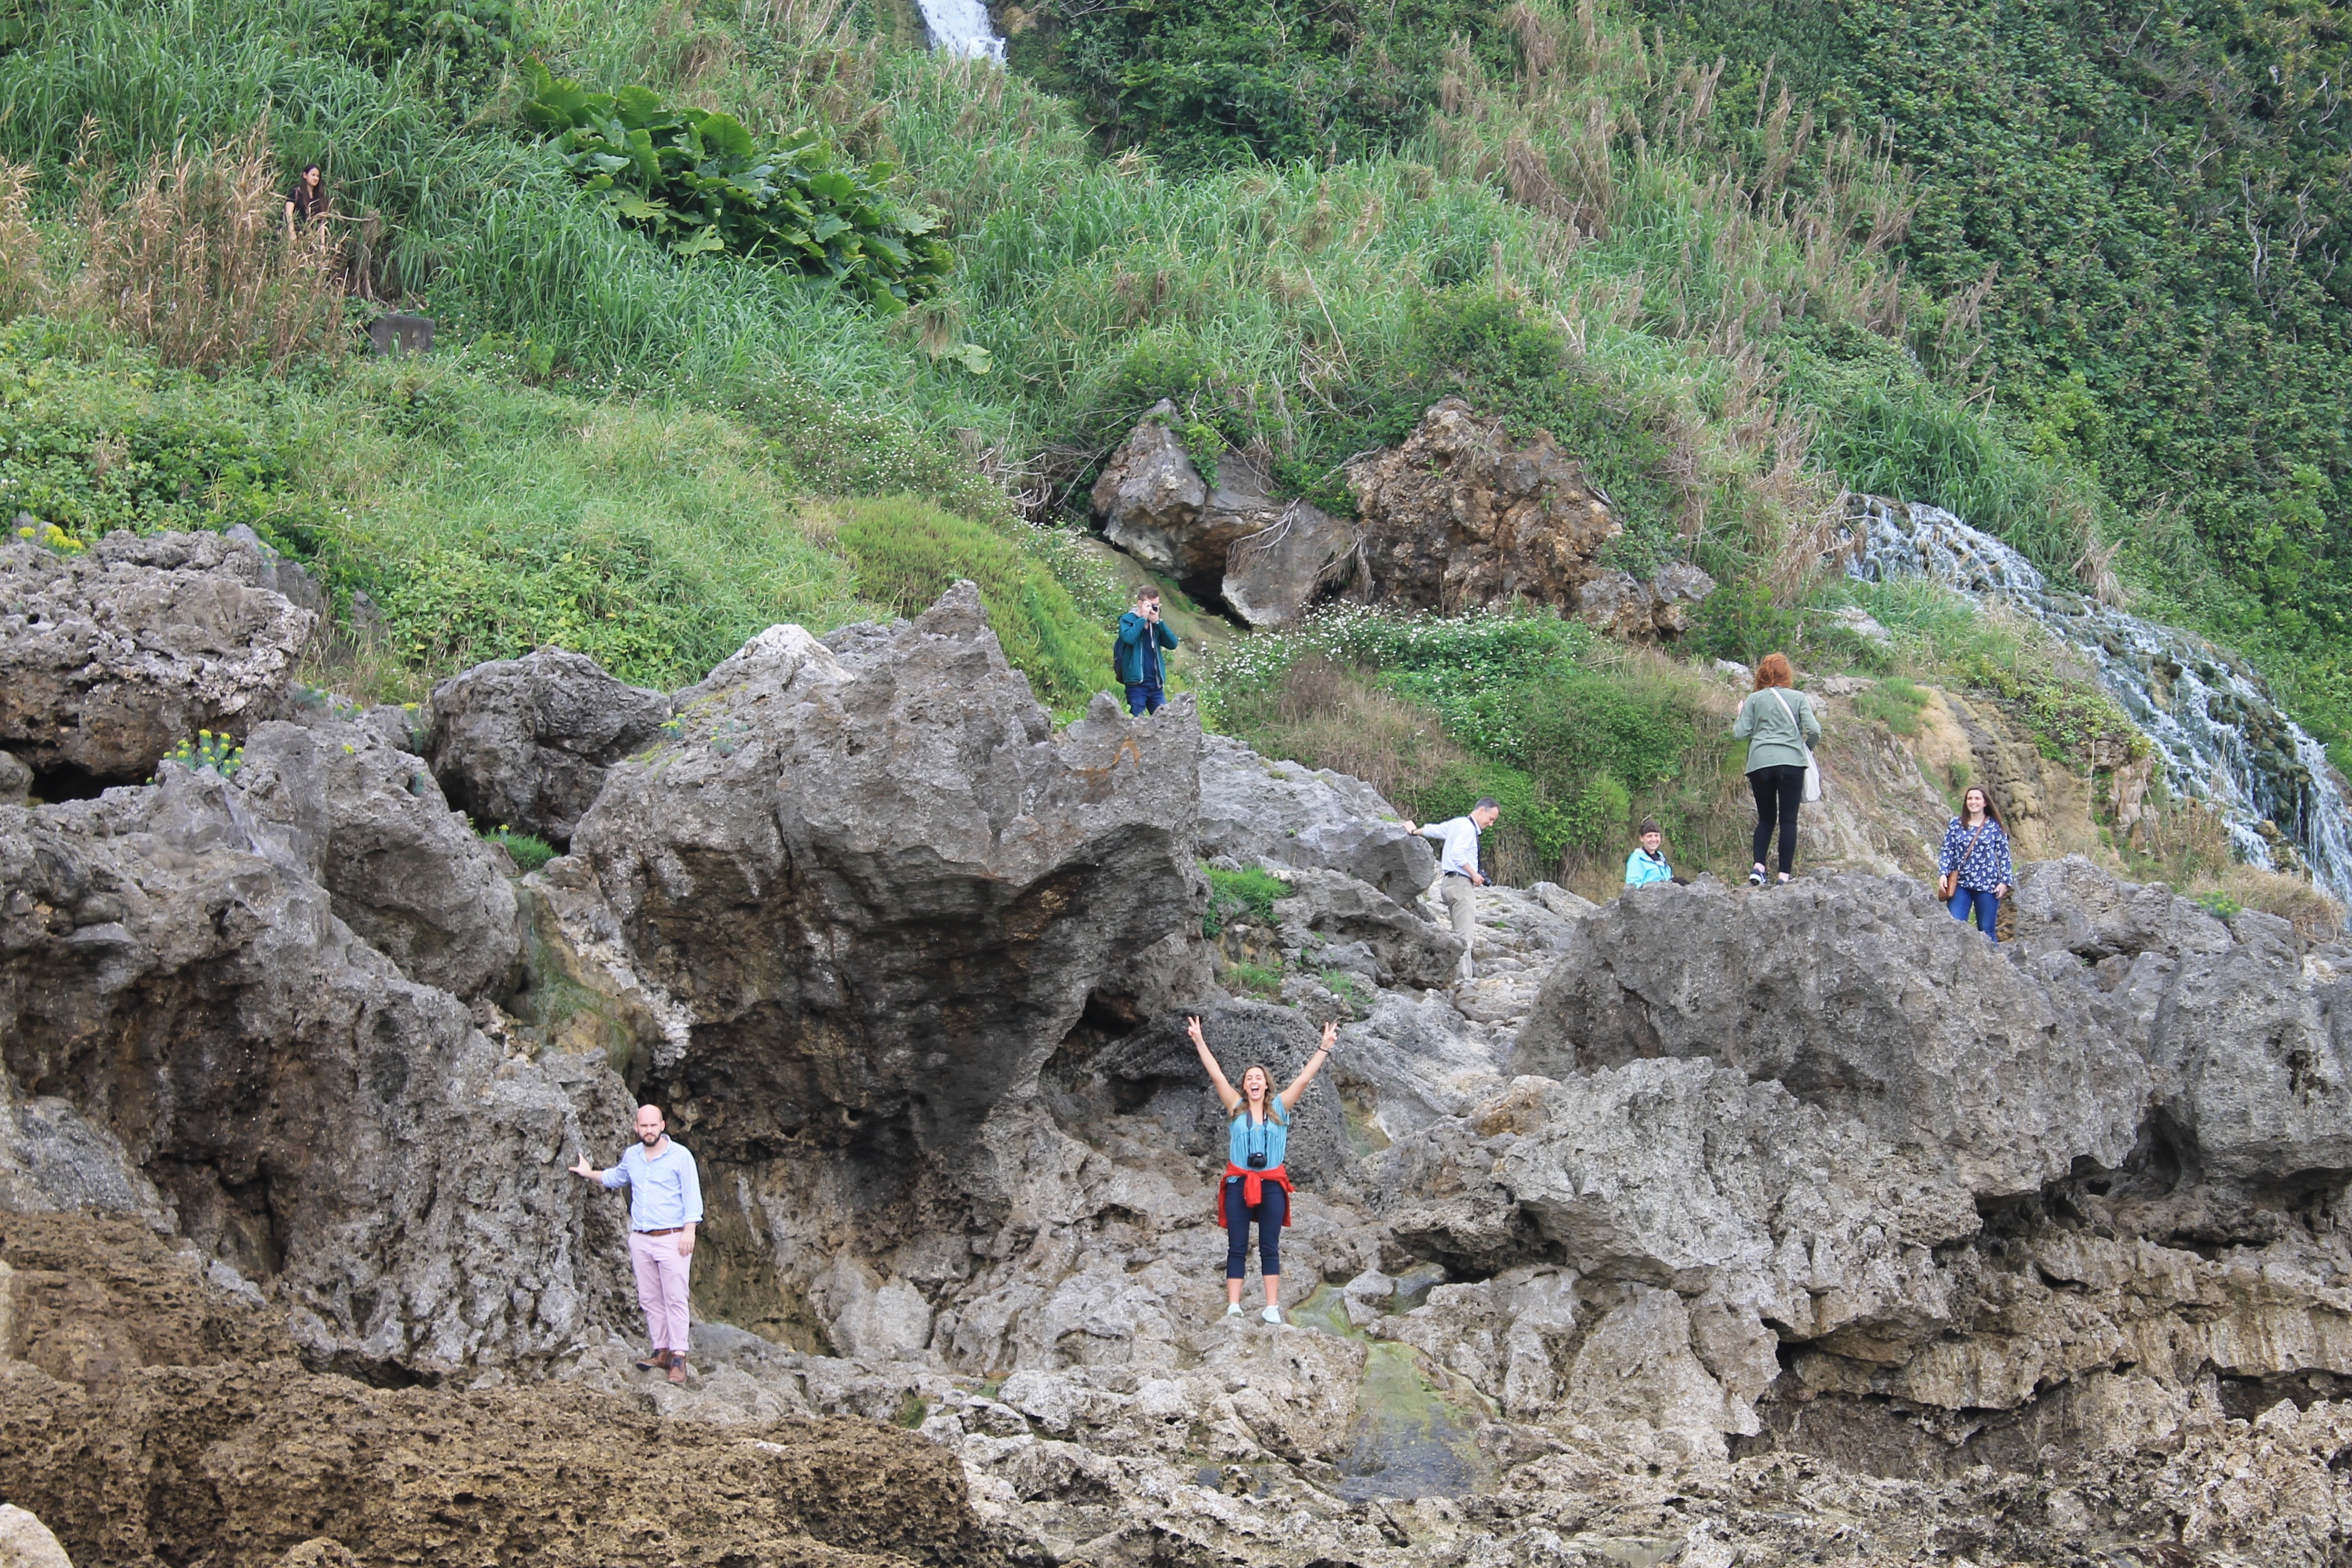 Students climb on a cliff in Okinawa, Japan. One student makes double peace signs with her arms raised.